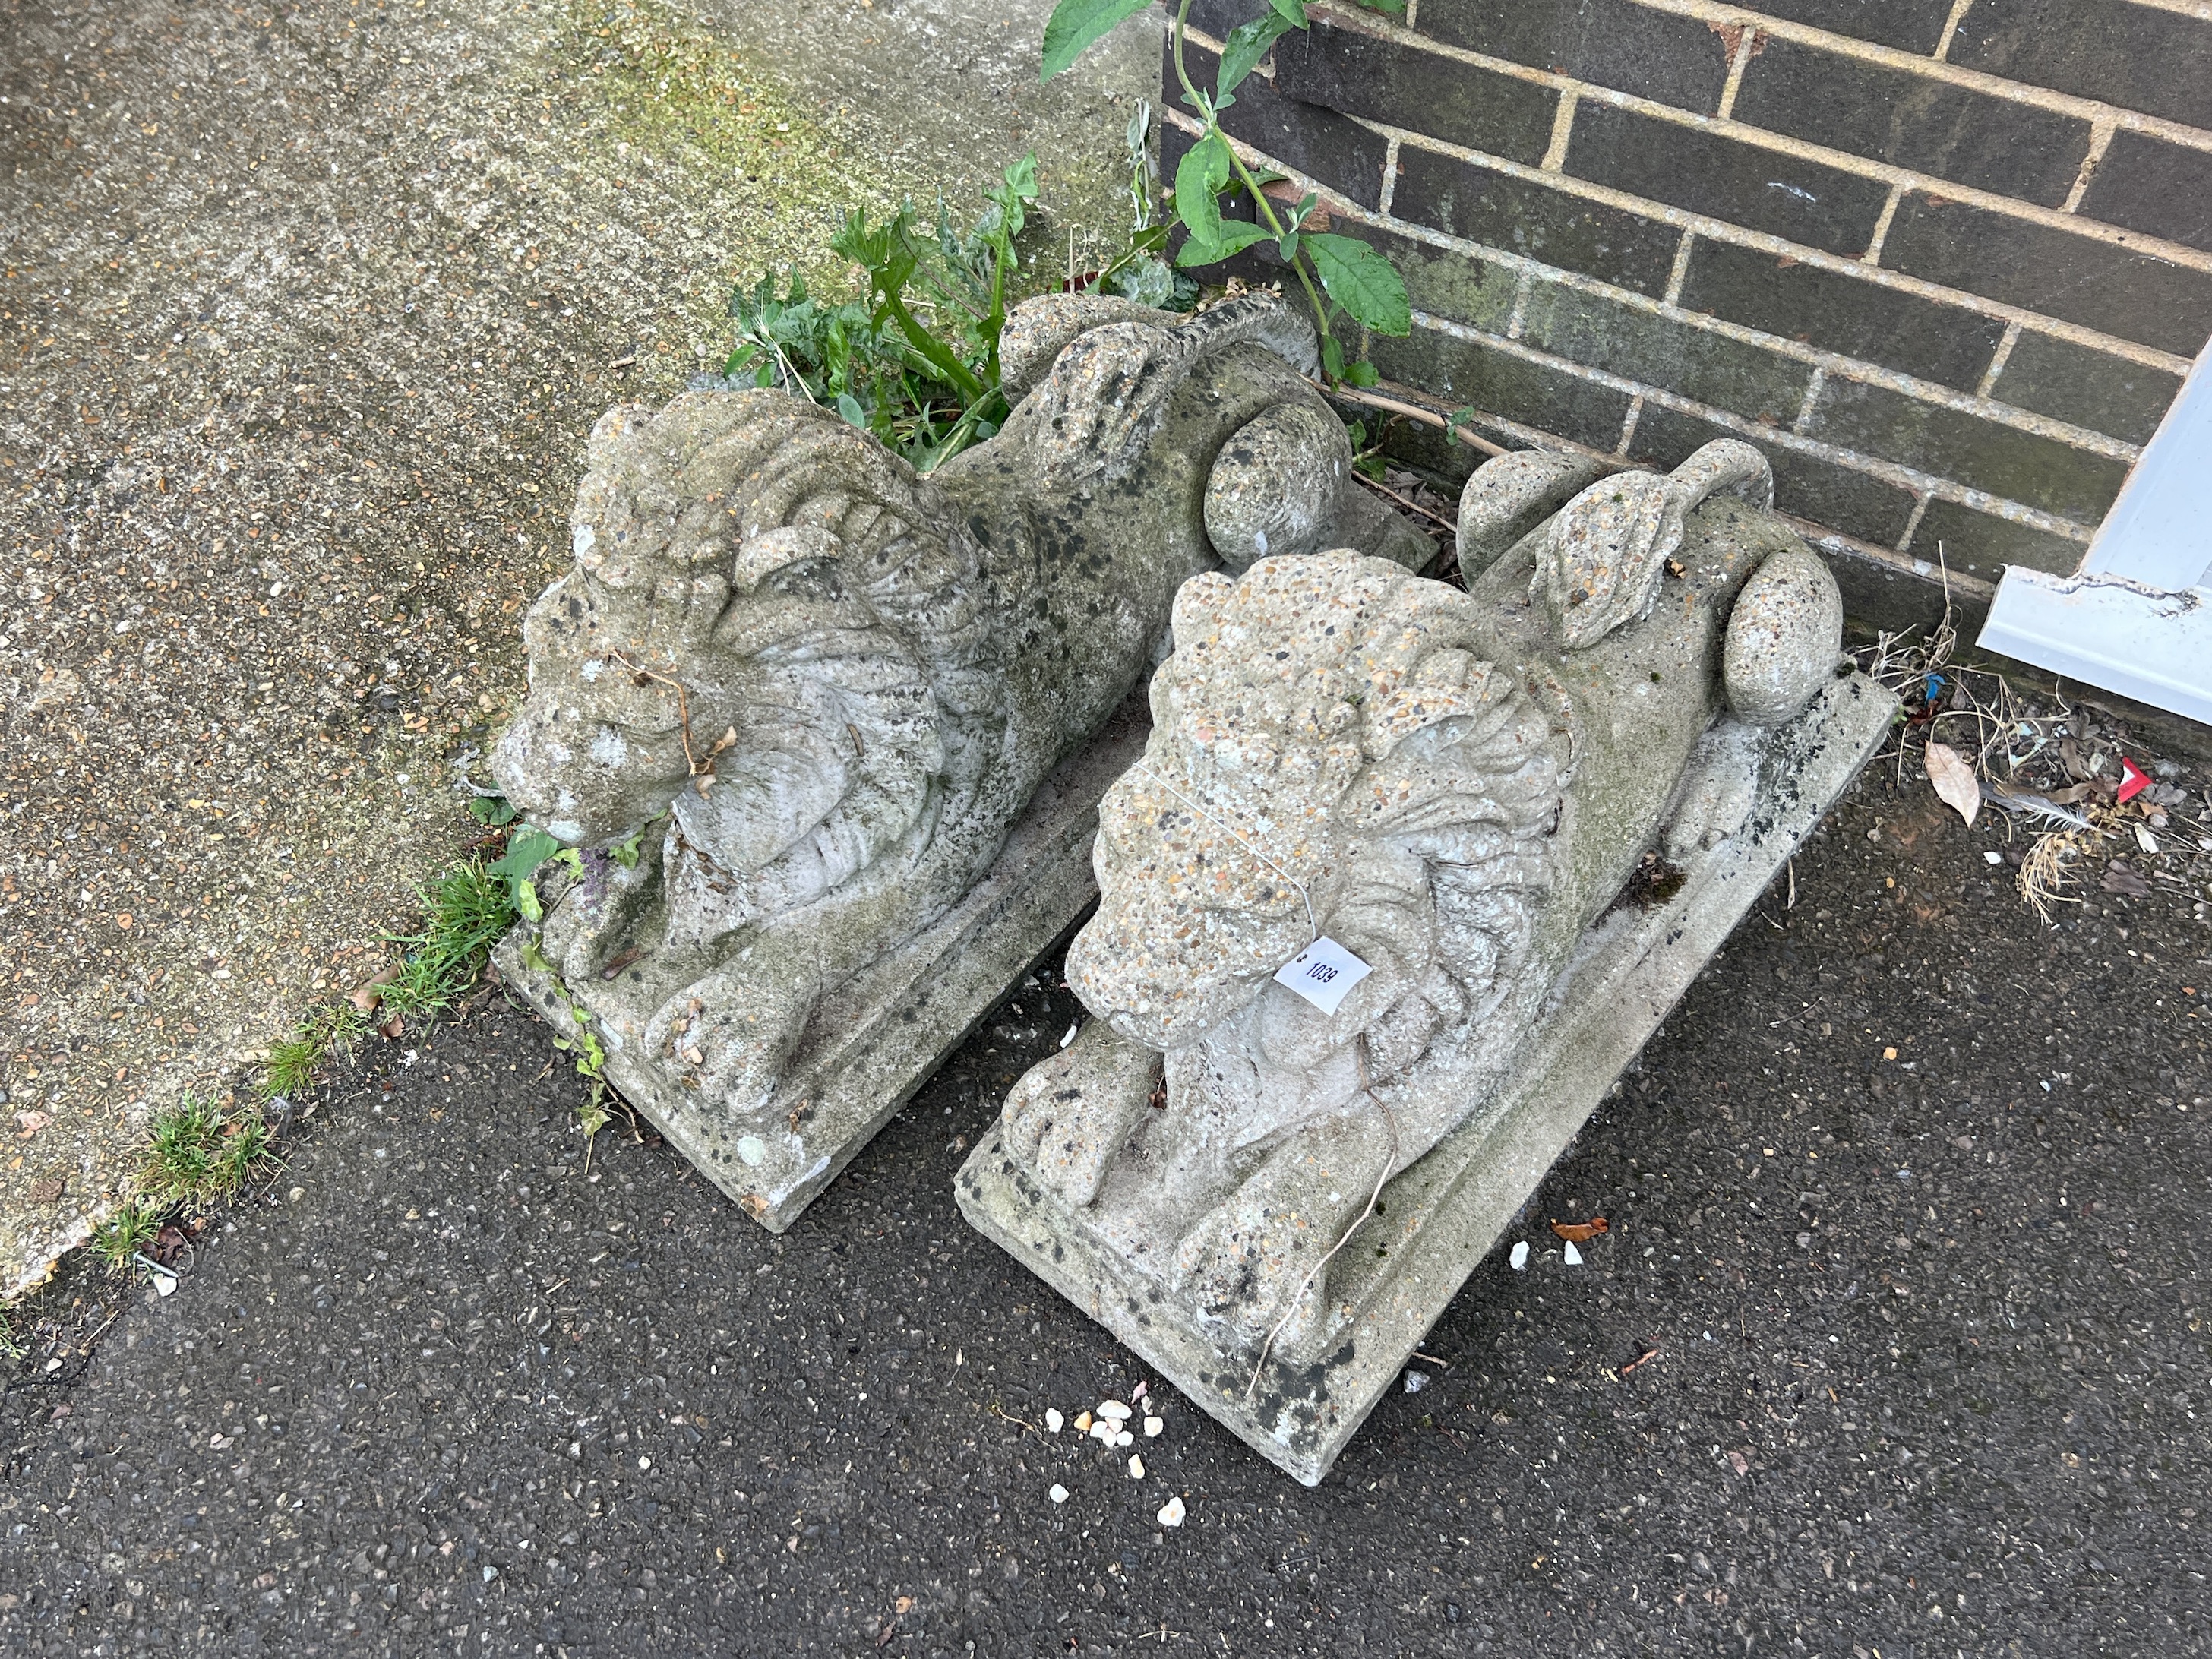 A pair of reconstituted stone recumbent lion garden ornaments, length 74cm, width 30cm, height 52cm